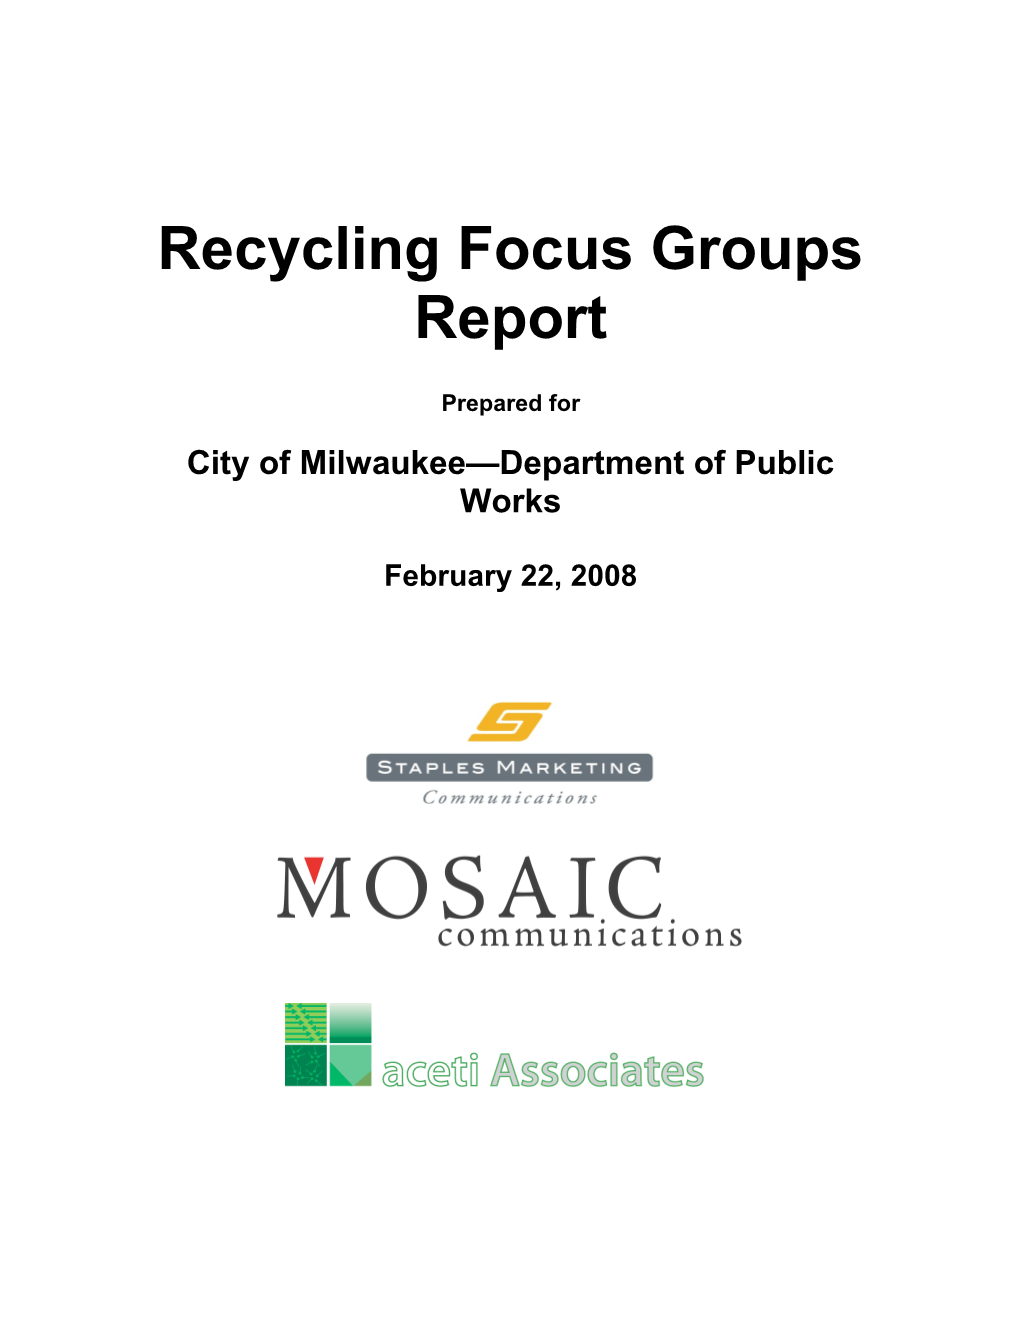 Recycling Focus Groups Report